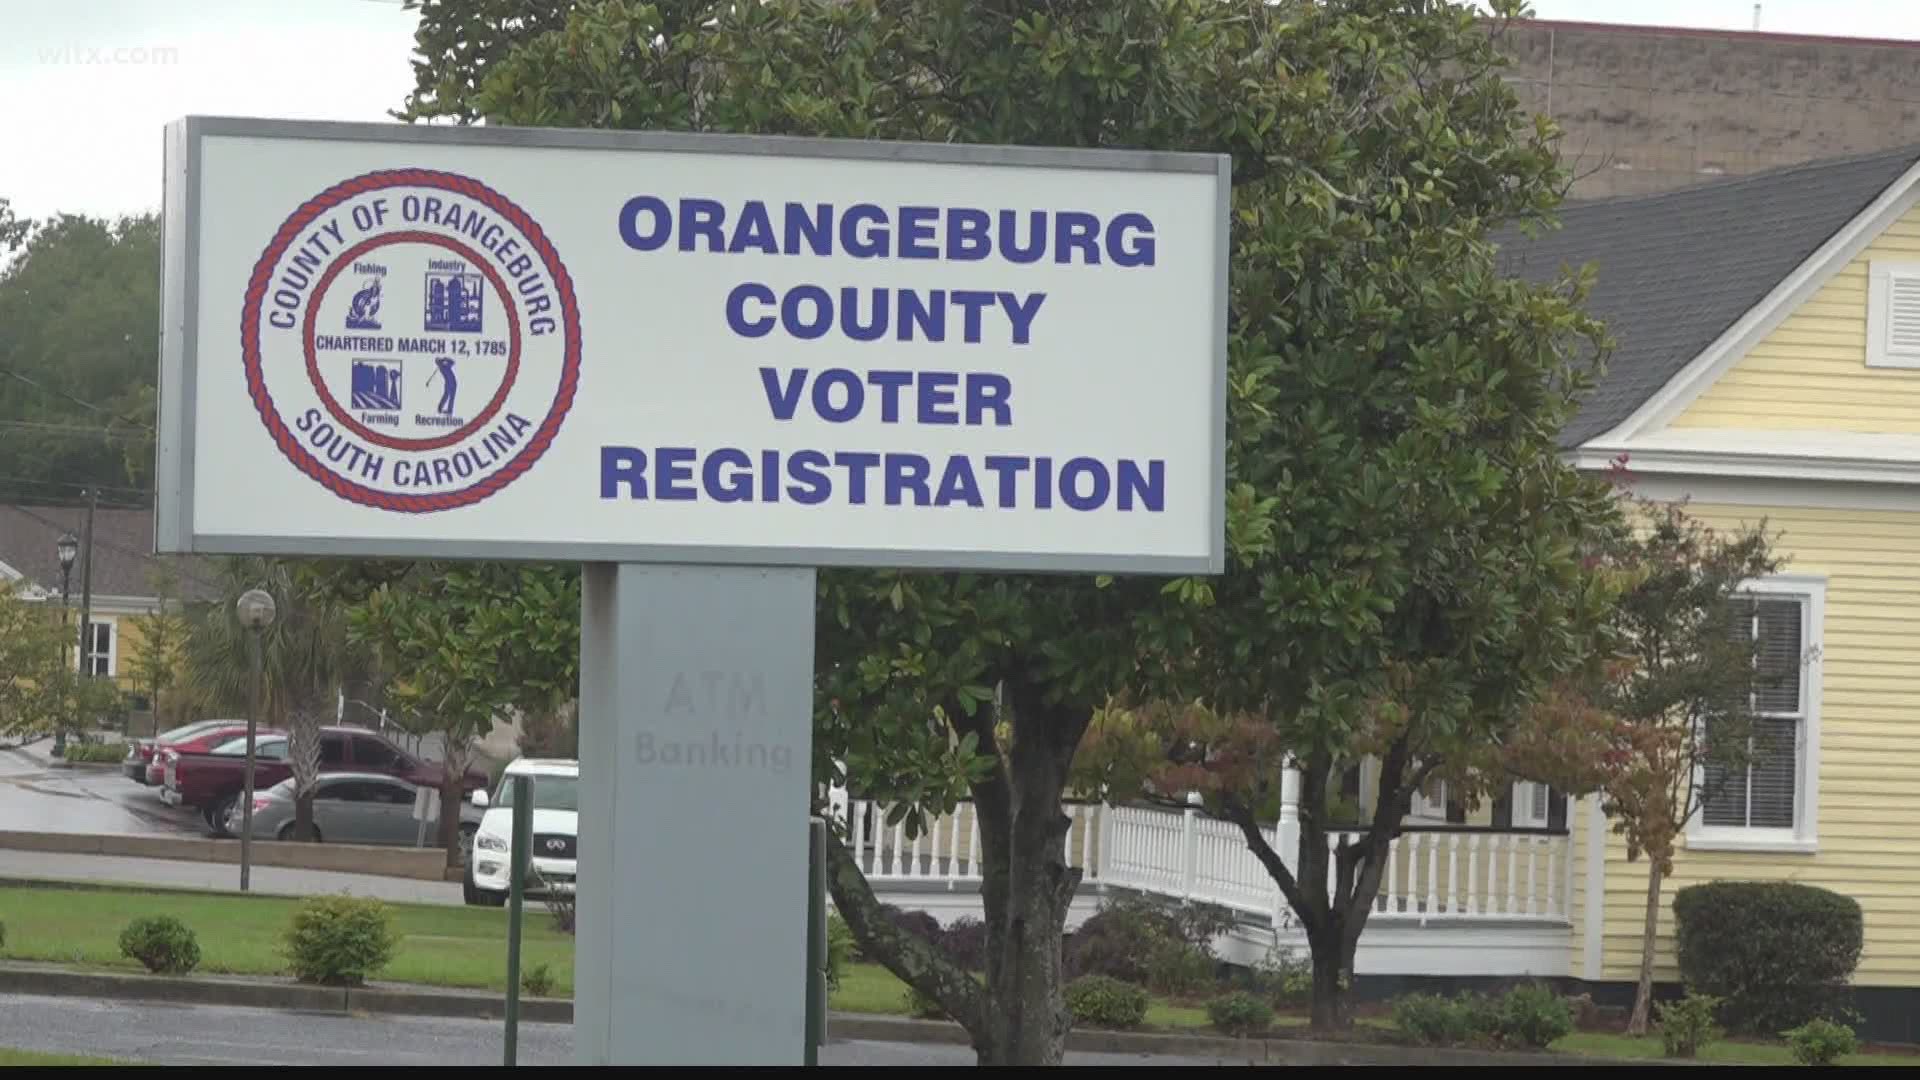 Registered voters will have three places to vote in Orangeburg county.